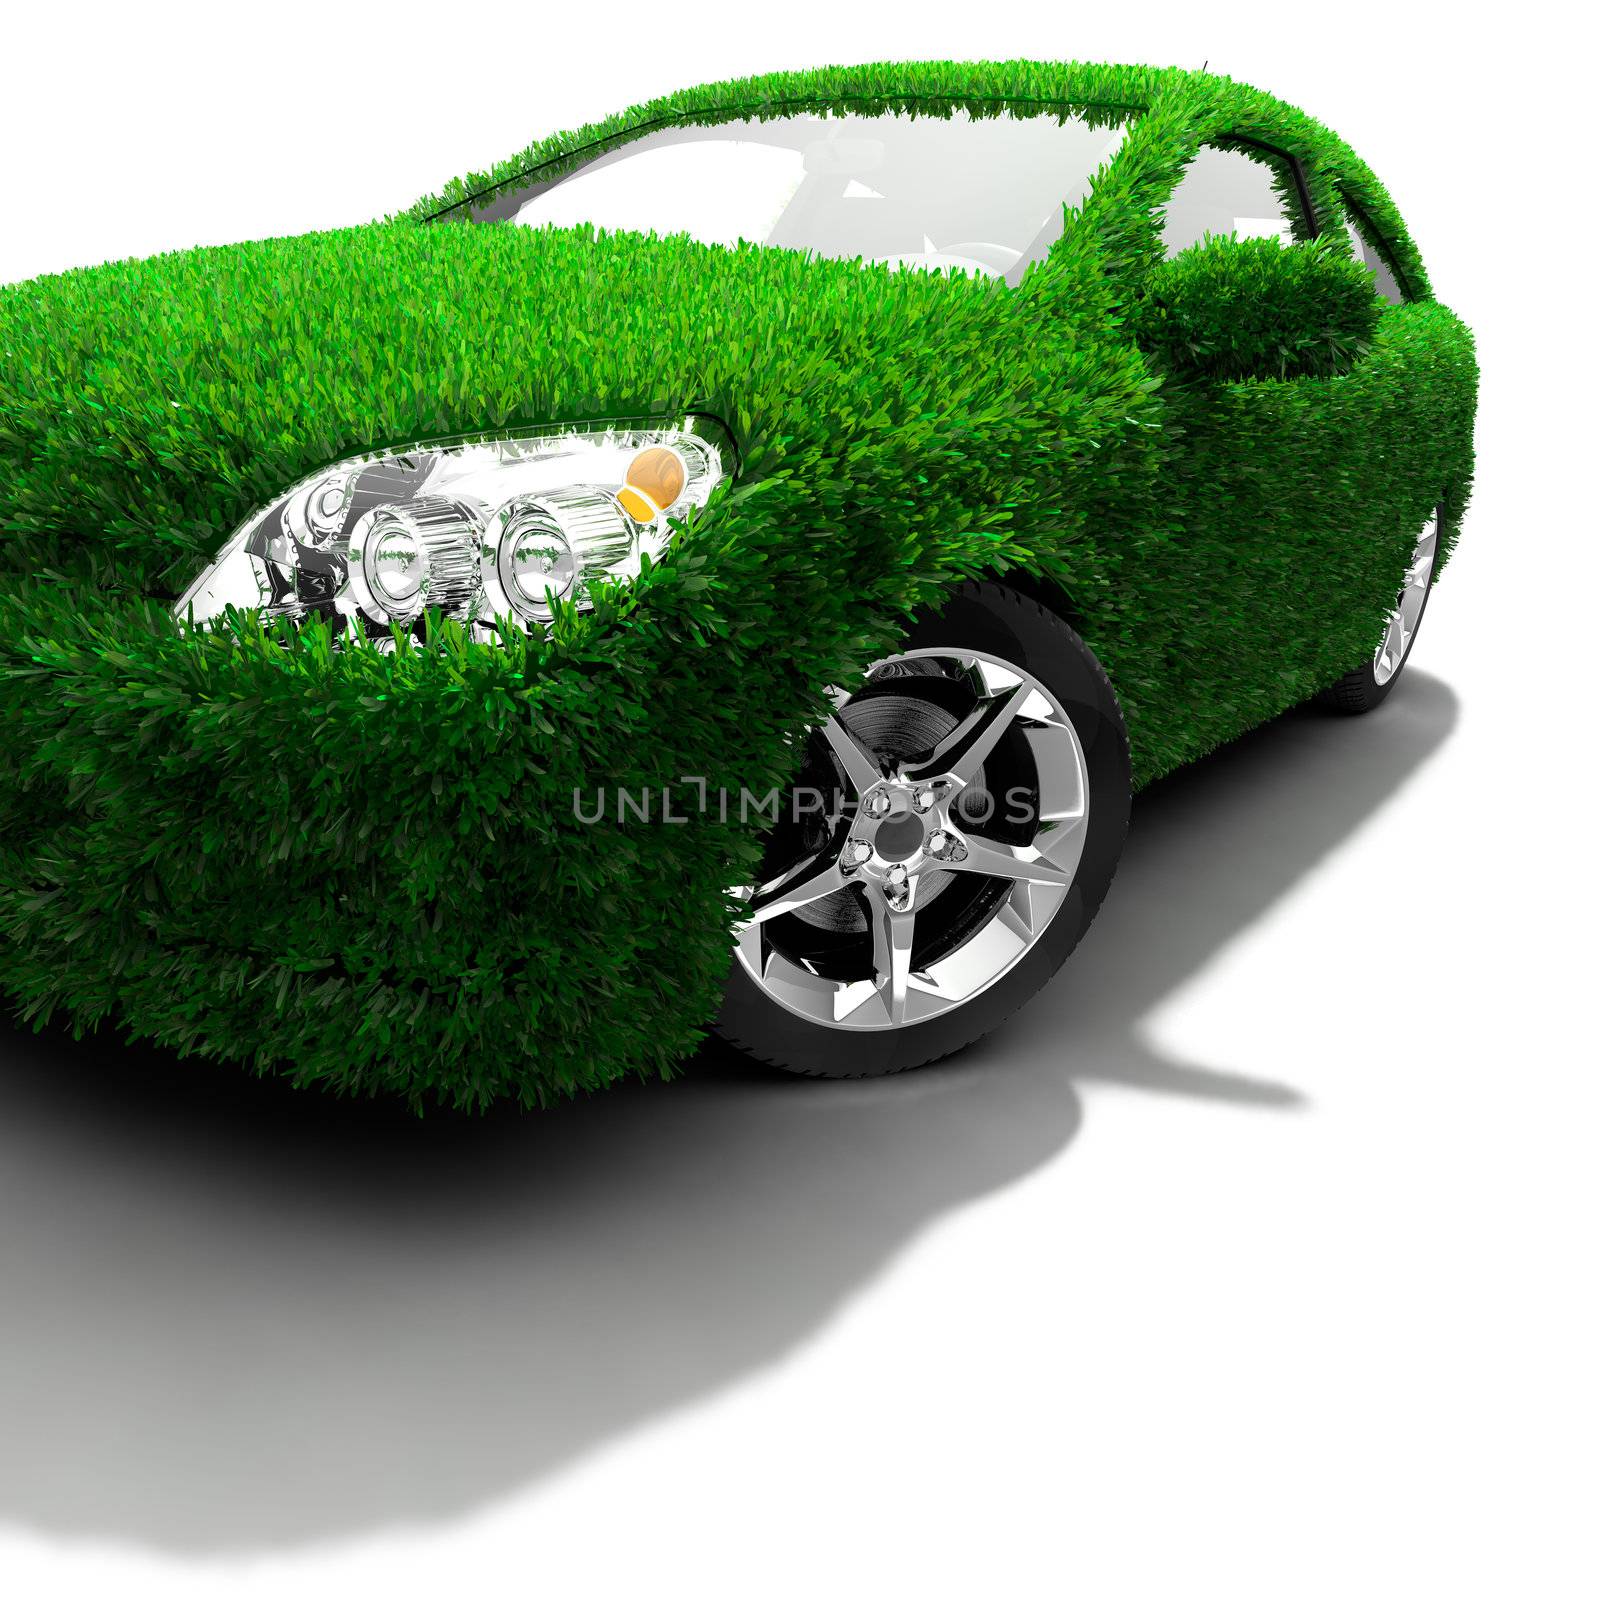 The metaphor of the green eco-friendly car by Antartis